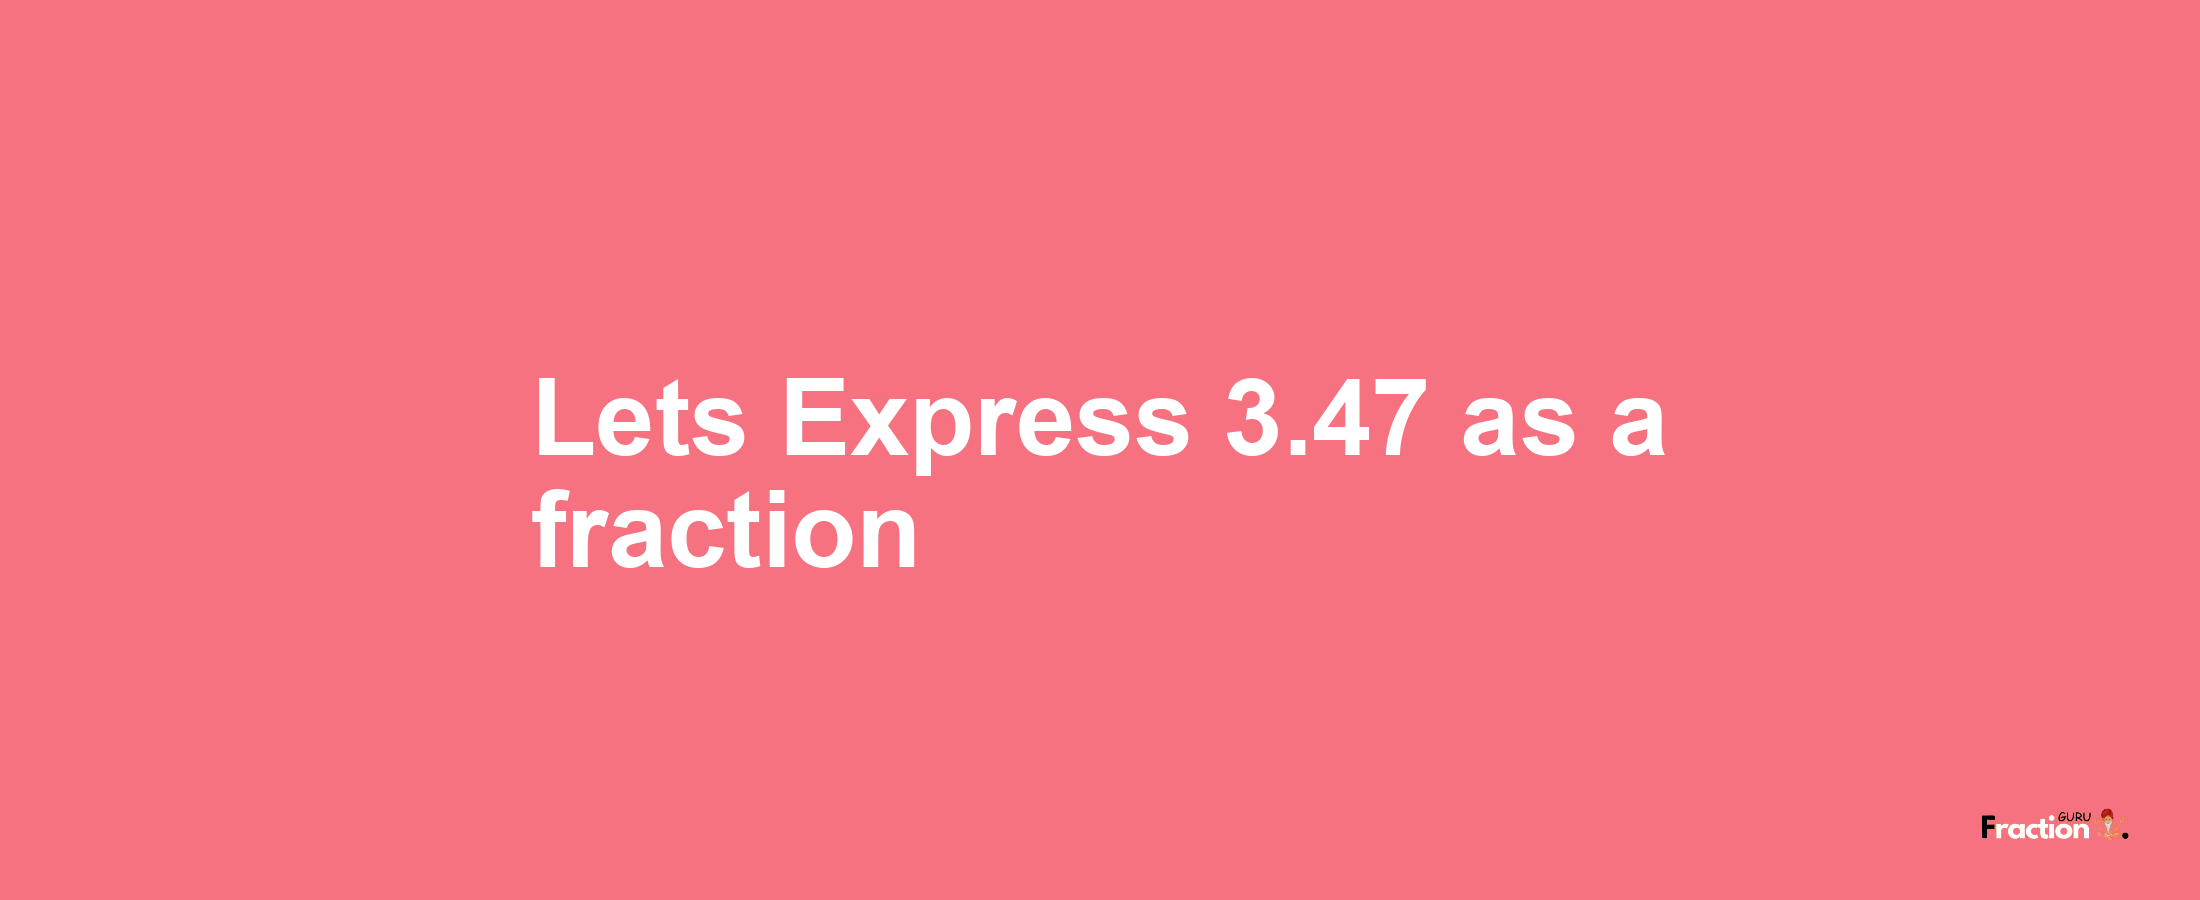 Lets Express 3.47 as afraction